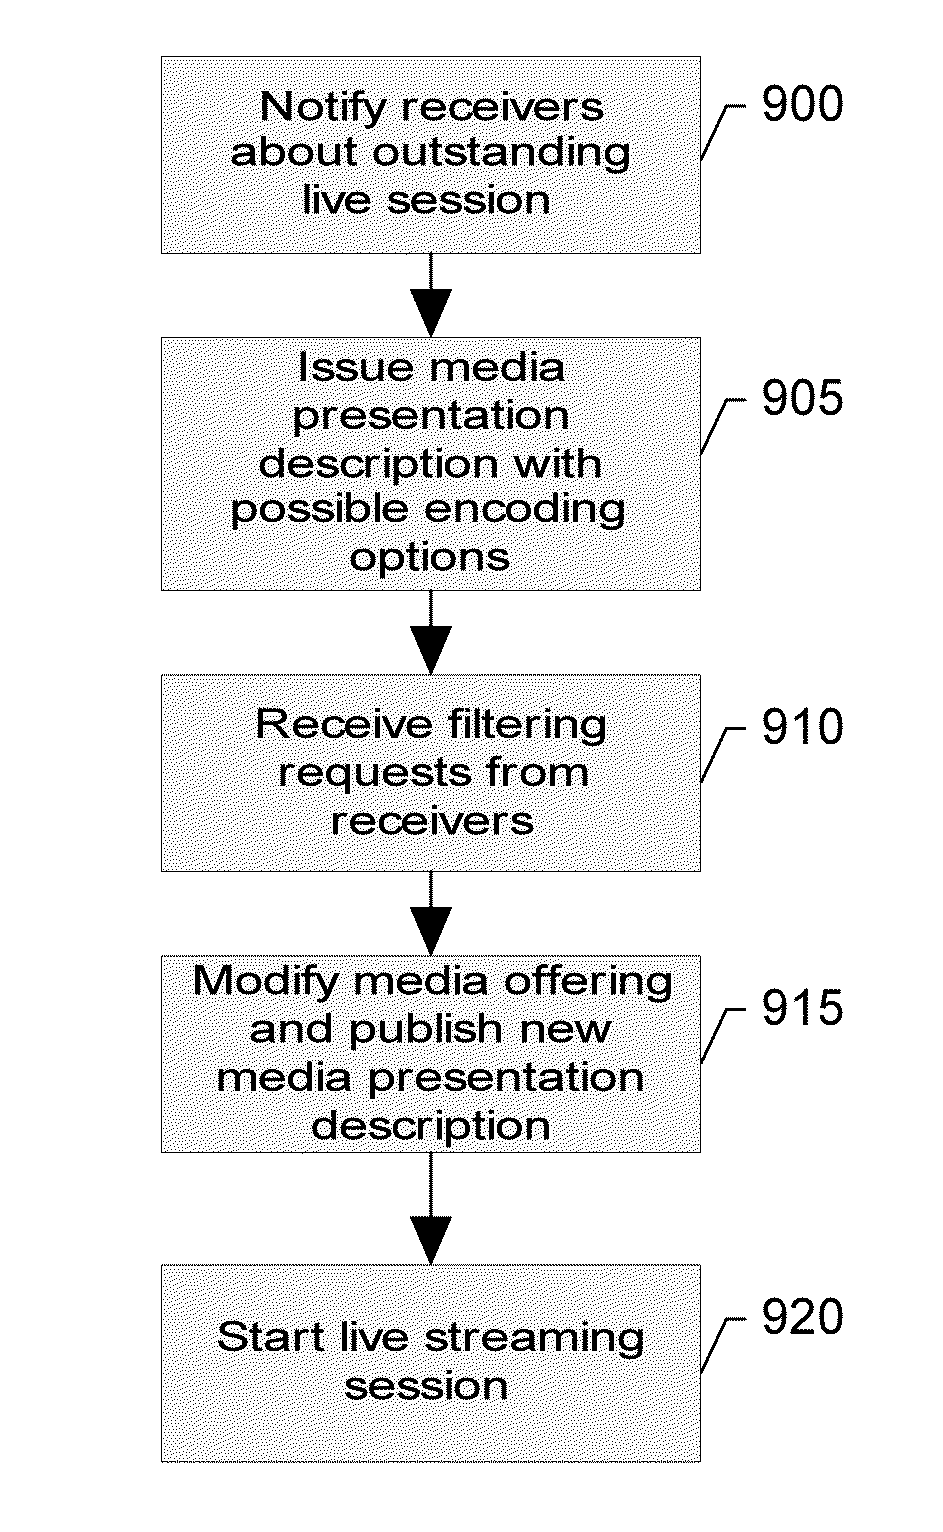 Methods, apparatuses and computer program products for enabling live sharing of data